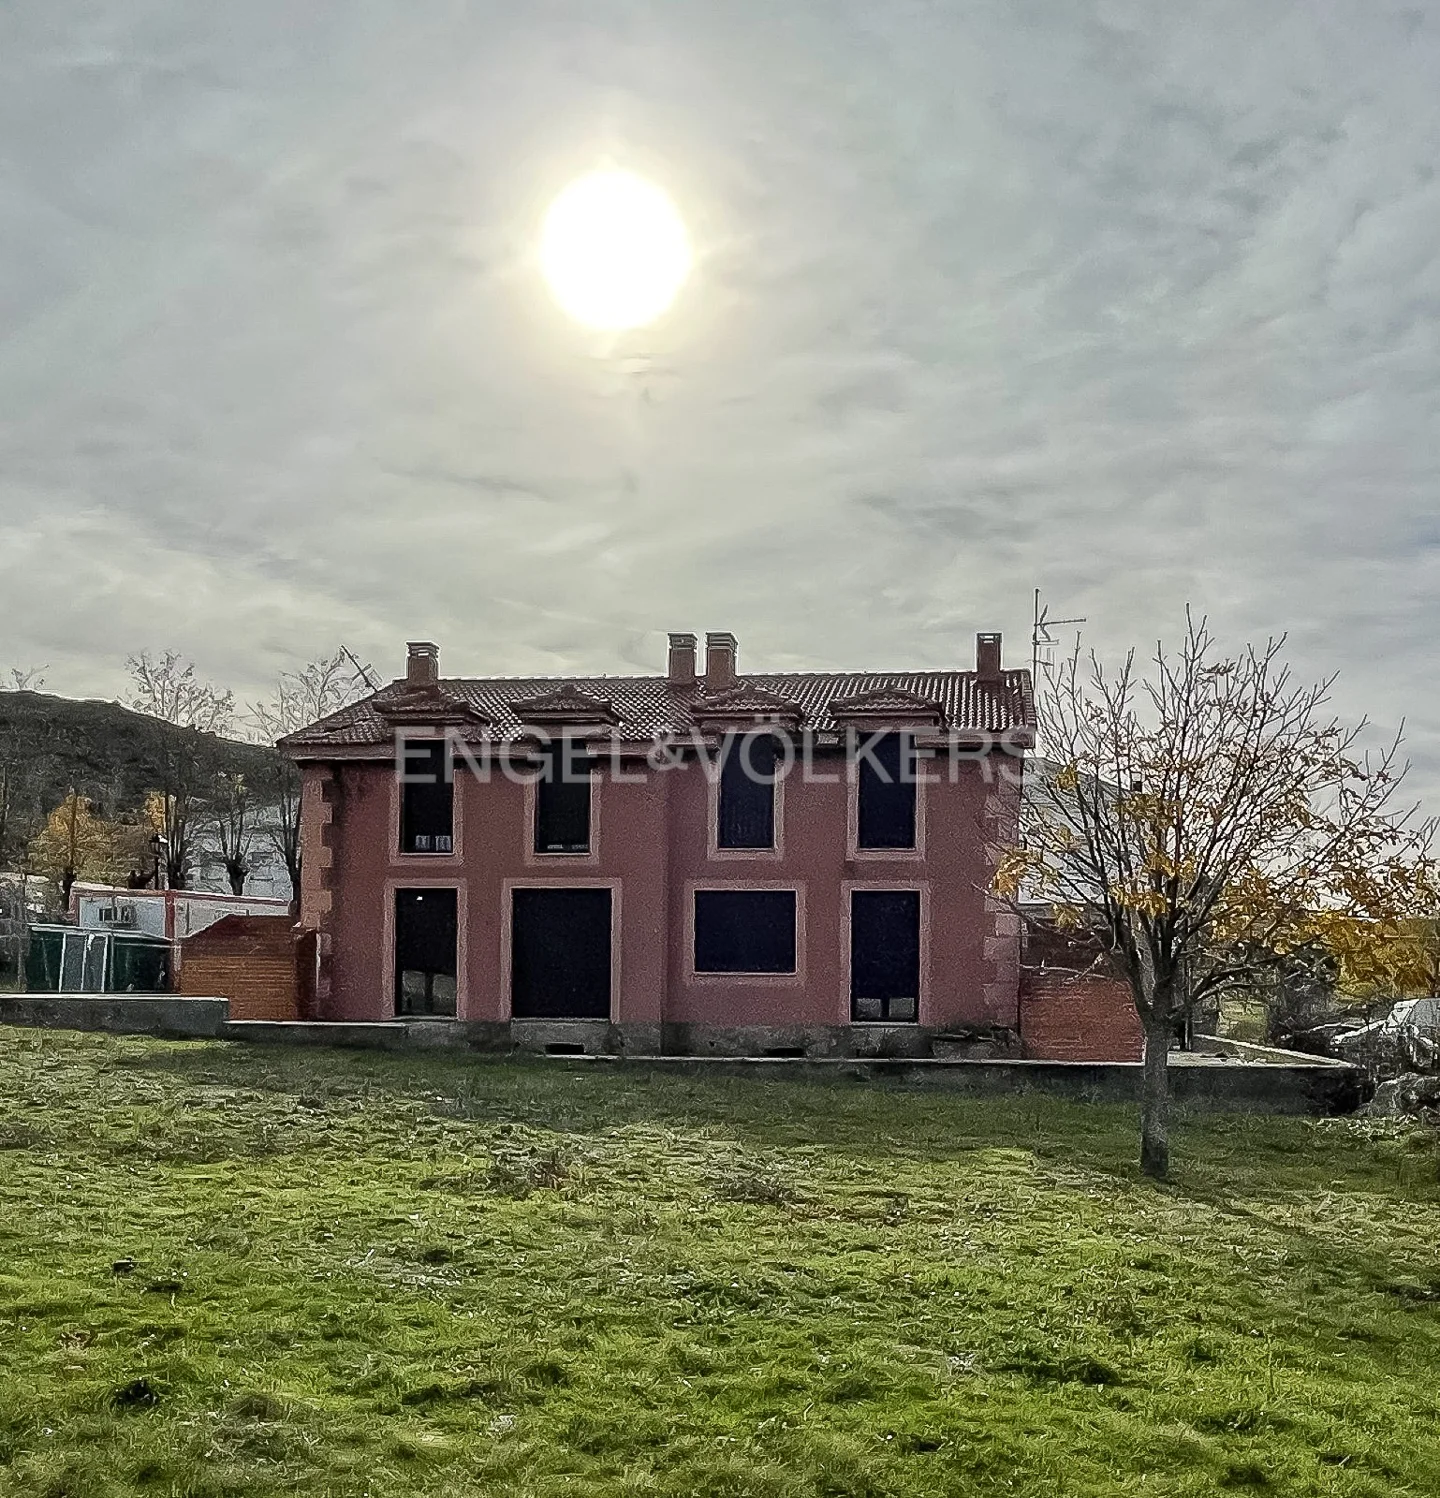 Semi-detached house with spectacular views of the Sierra de Guadarrama